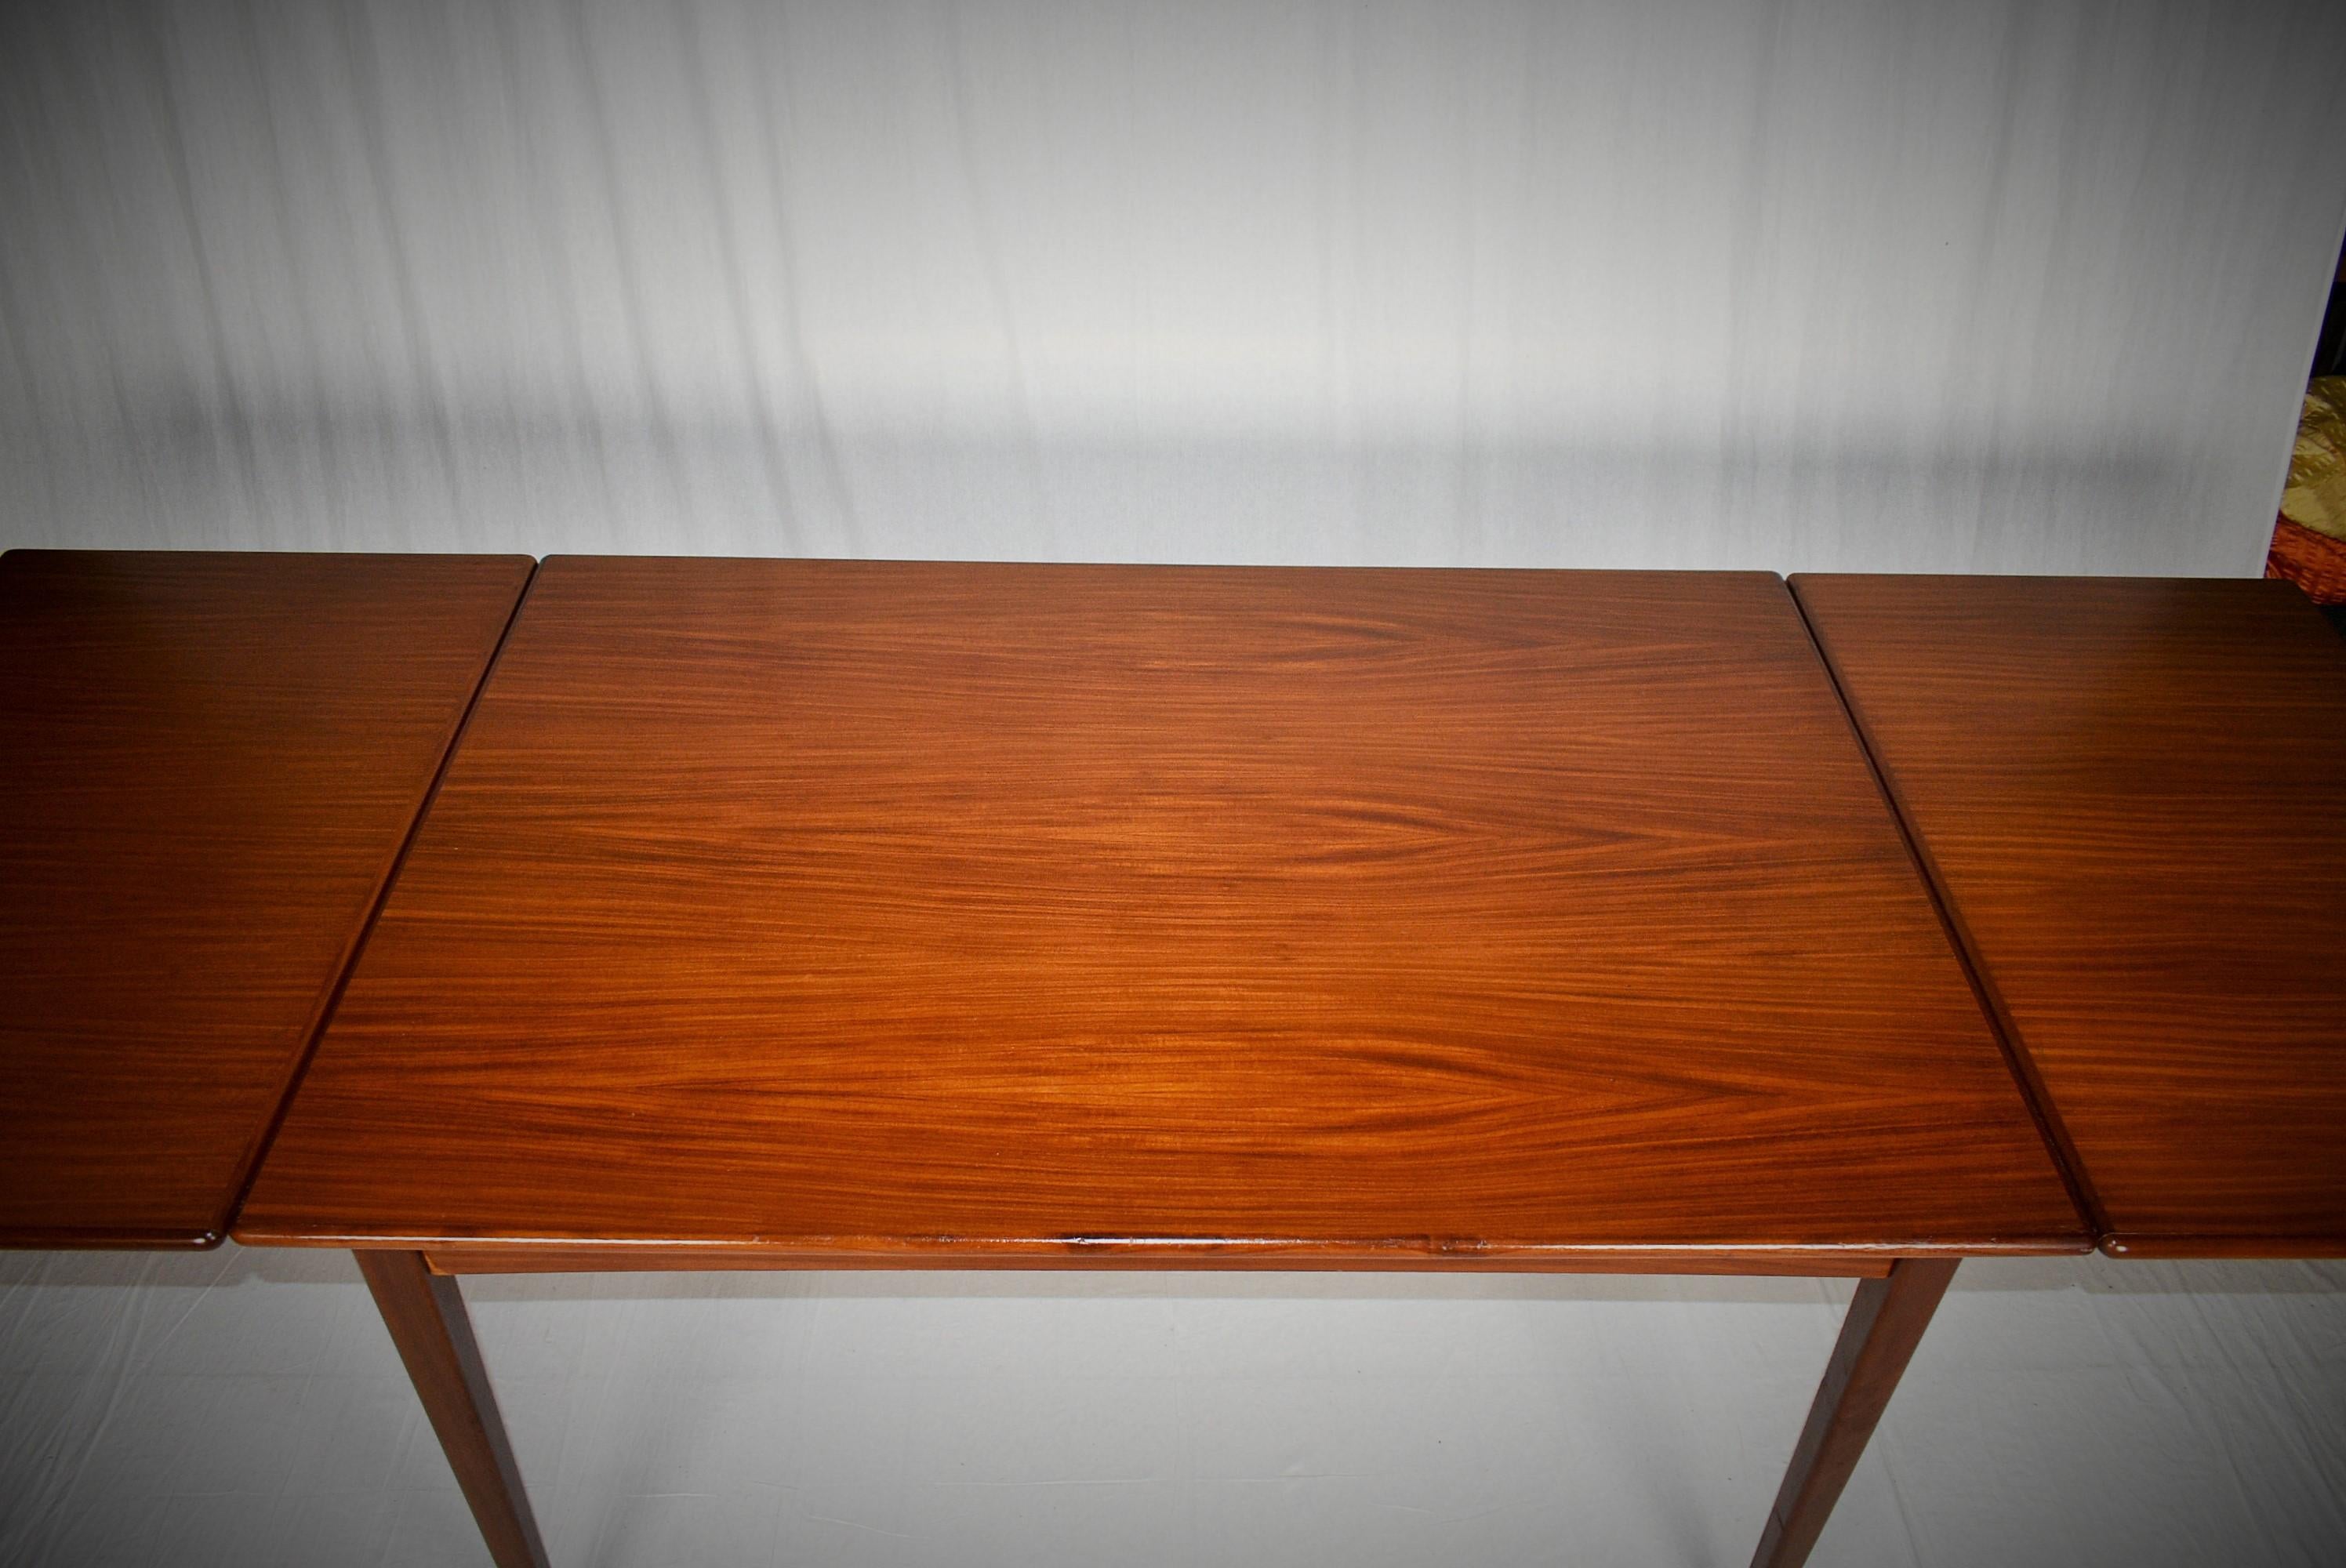 - Made in Sweden
- Made of teak wood
- Dimension of extending width 249 cm
- Good condition.